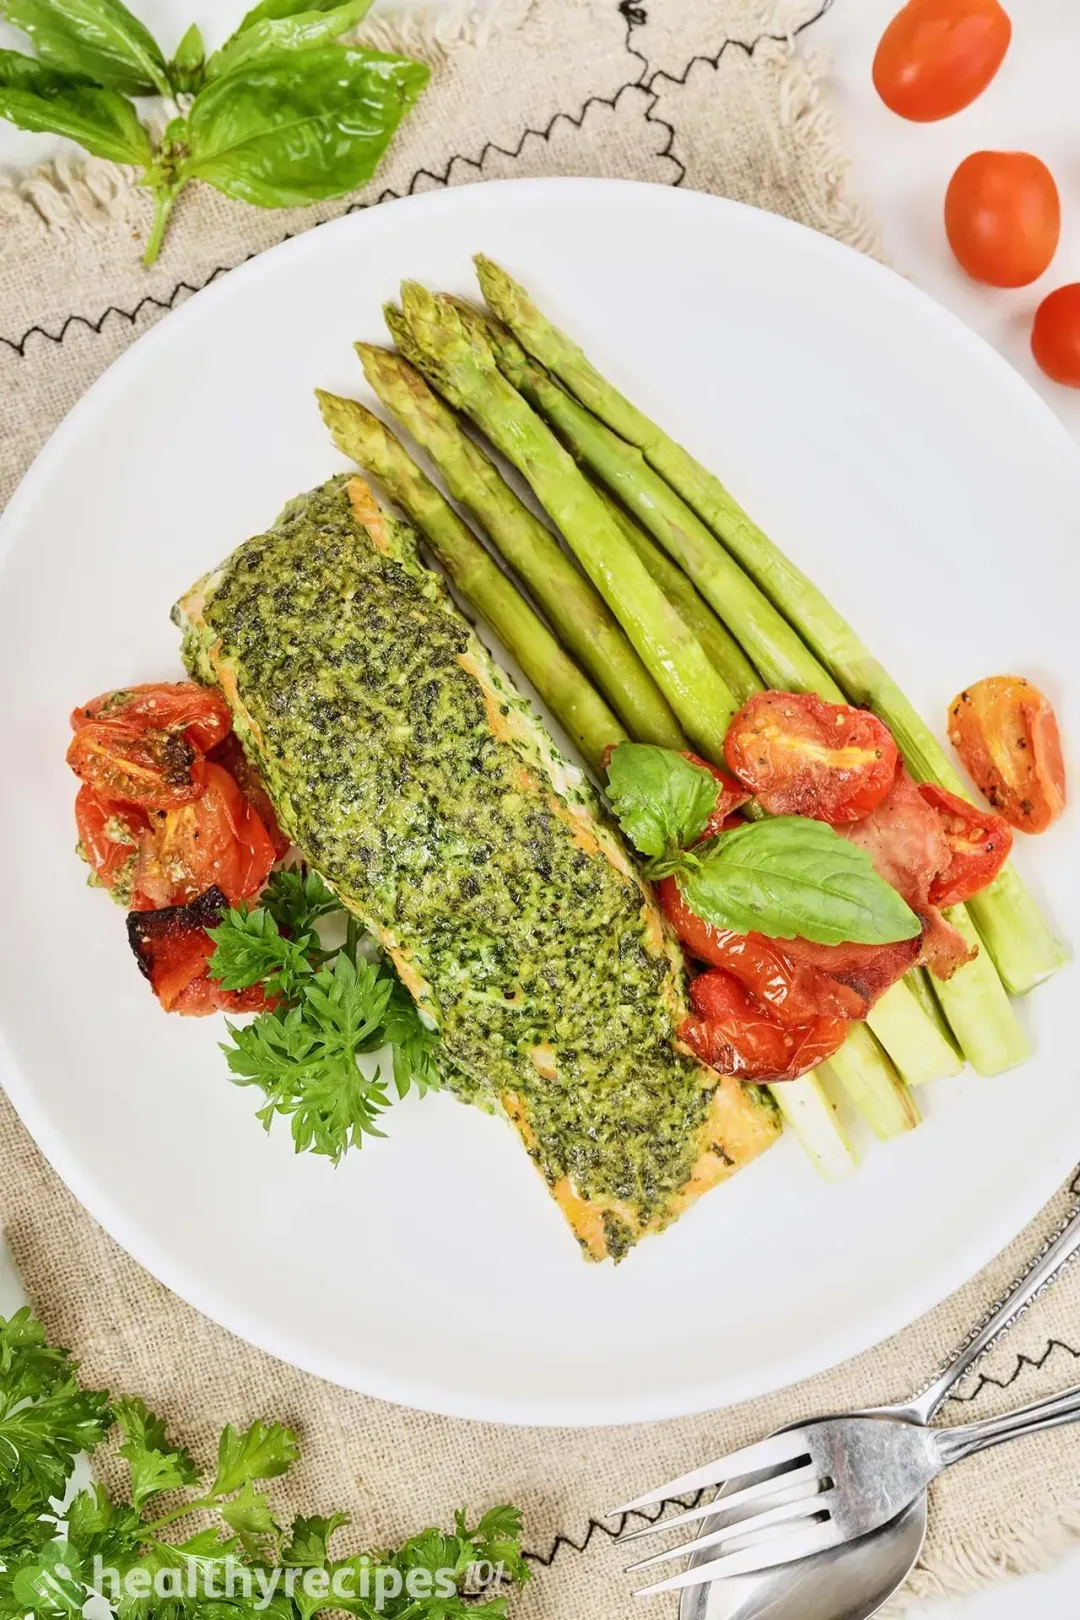 A plate of salmon pesto on a tablecloth surrounded by some fresh basil leaves, cherry tomatoes, parsley